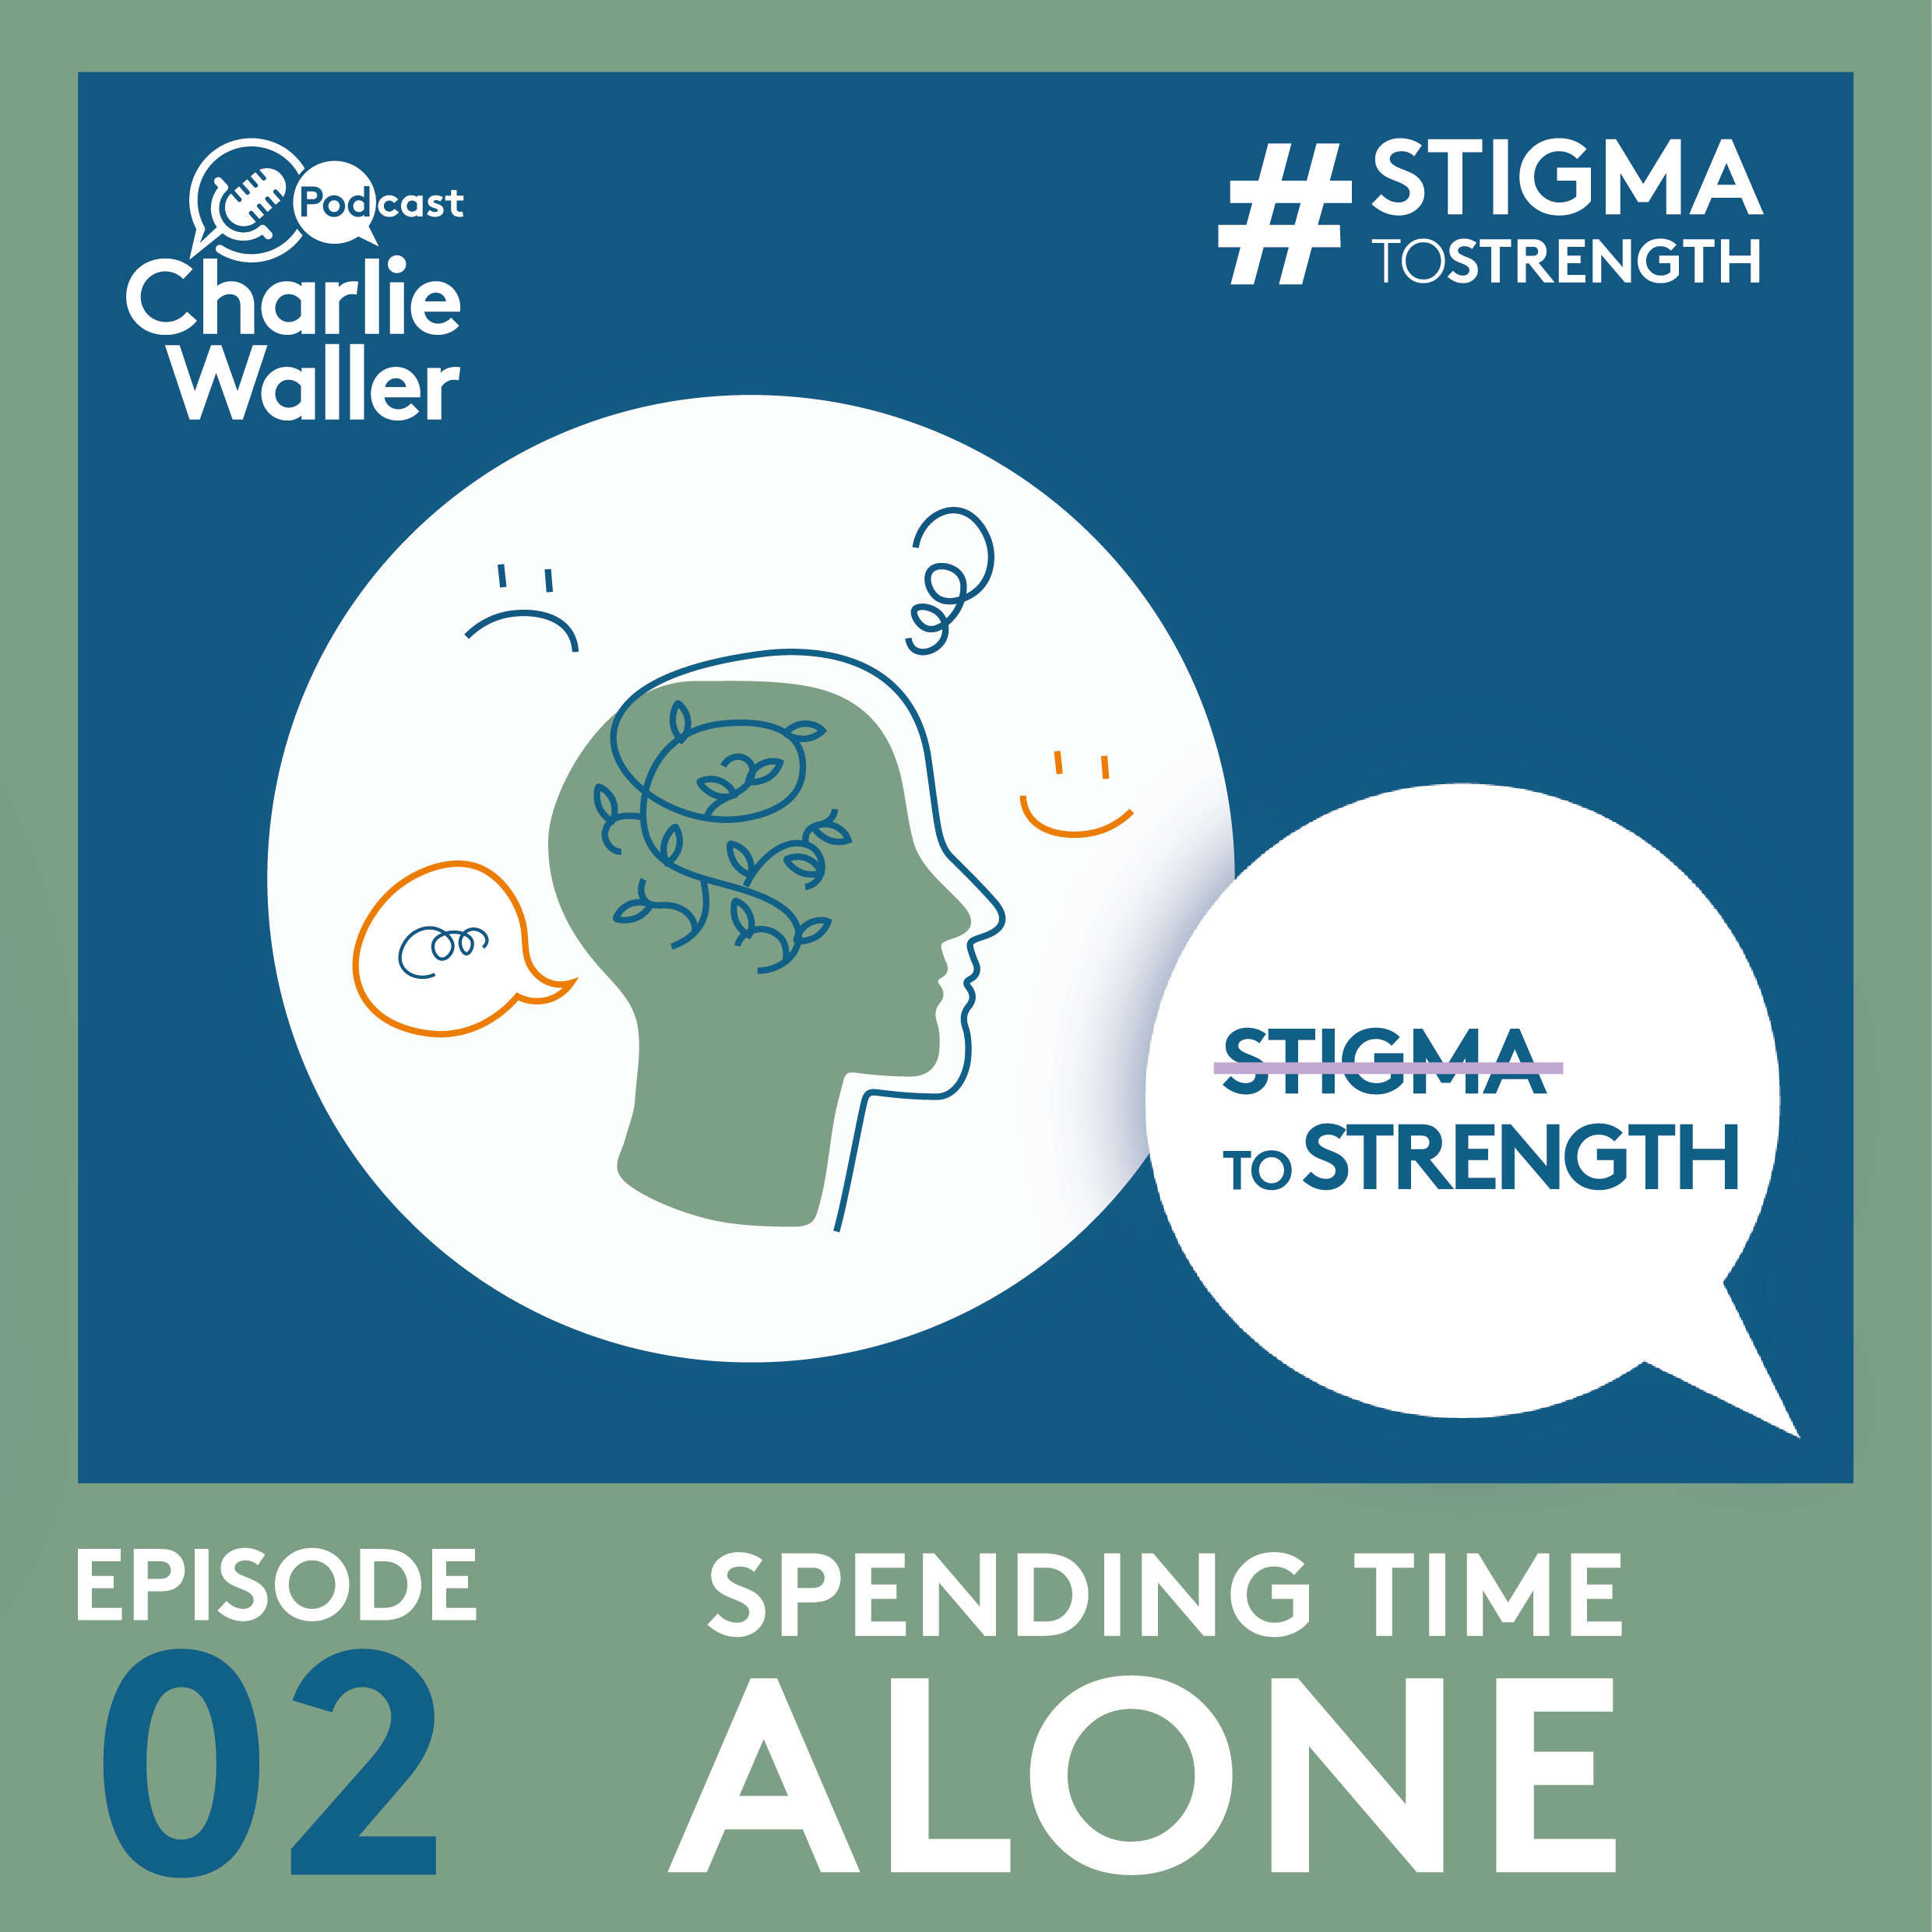 Thumbnail image for episode two of Stigma to Strength podcast - Spending Time Alone